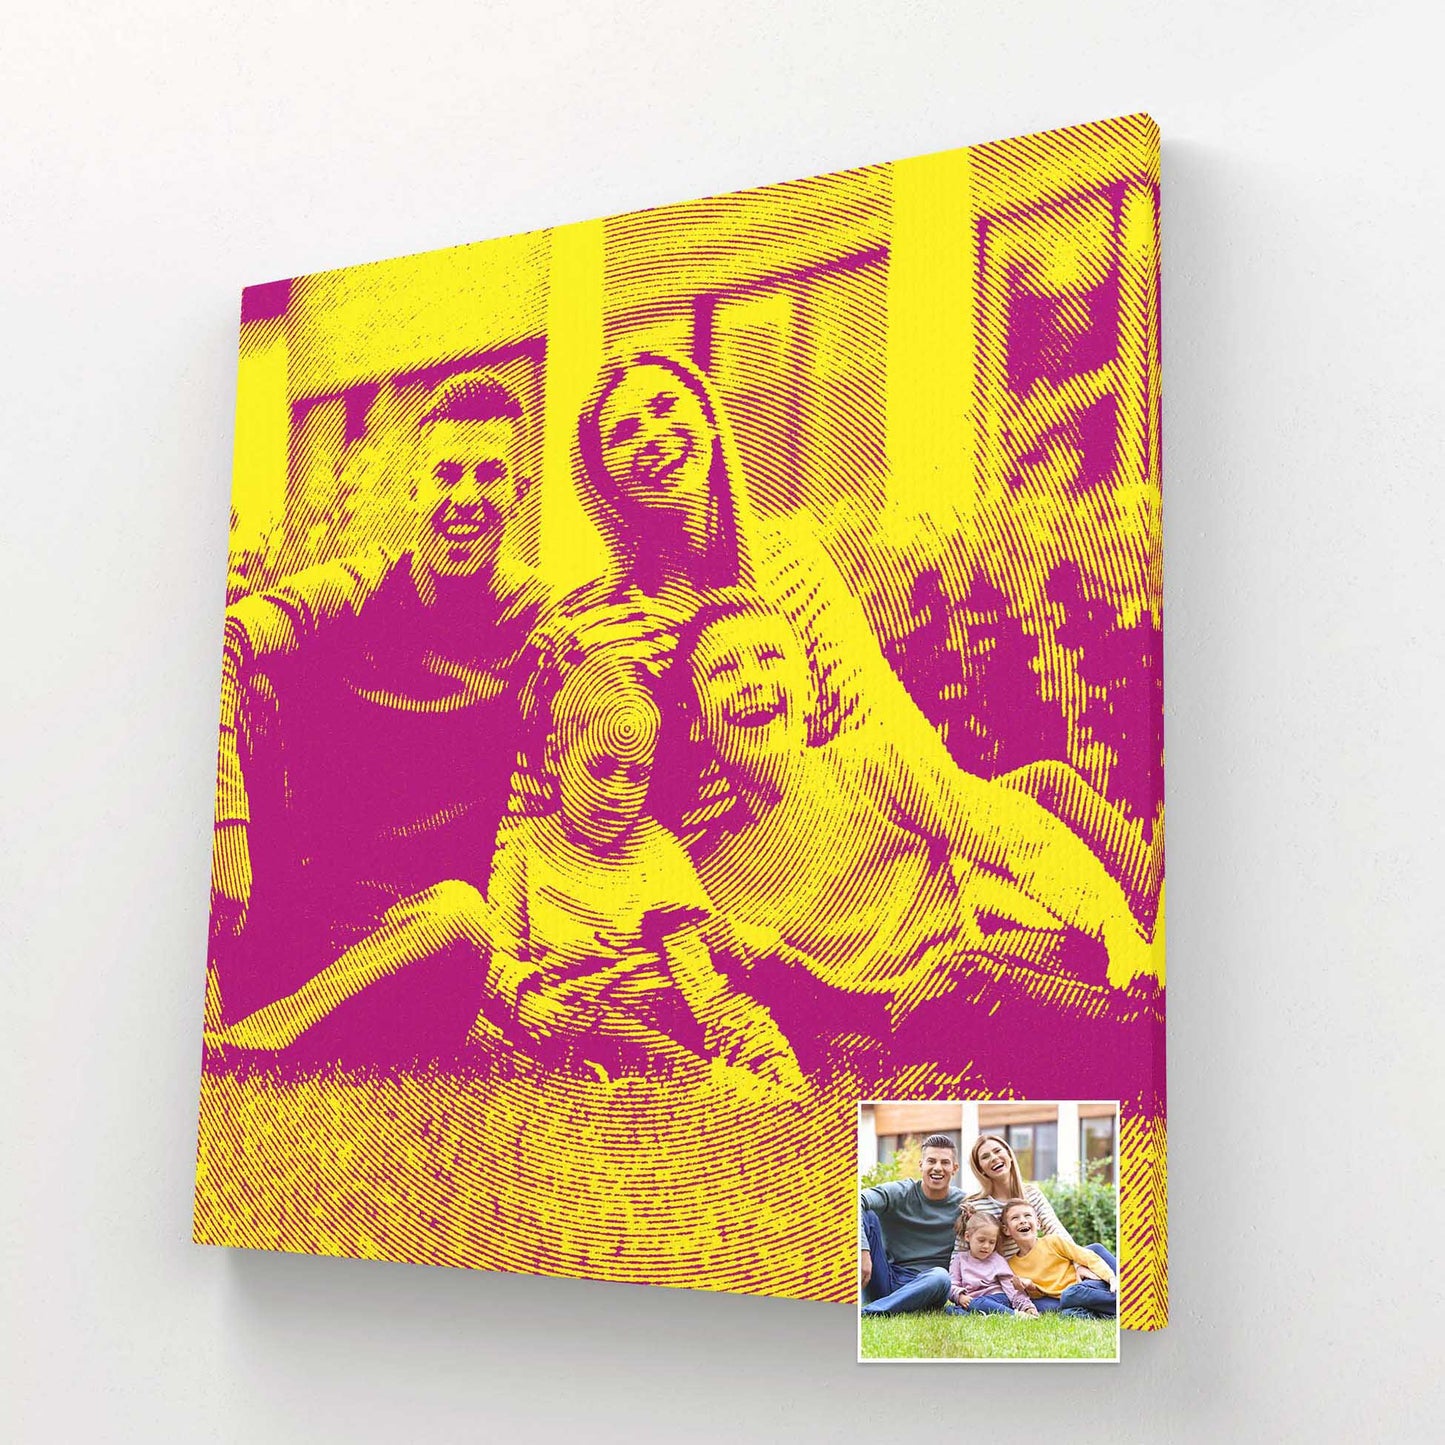 Personalised Yellow and Pink Texture Canvas: A burst of vivid colors that brings happiness and joy to any room